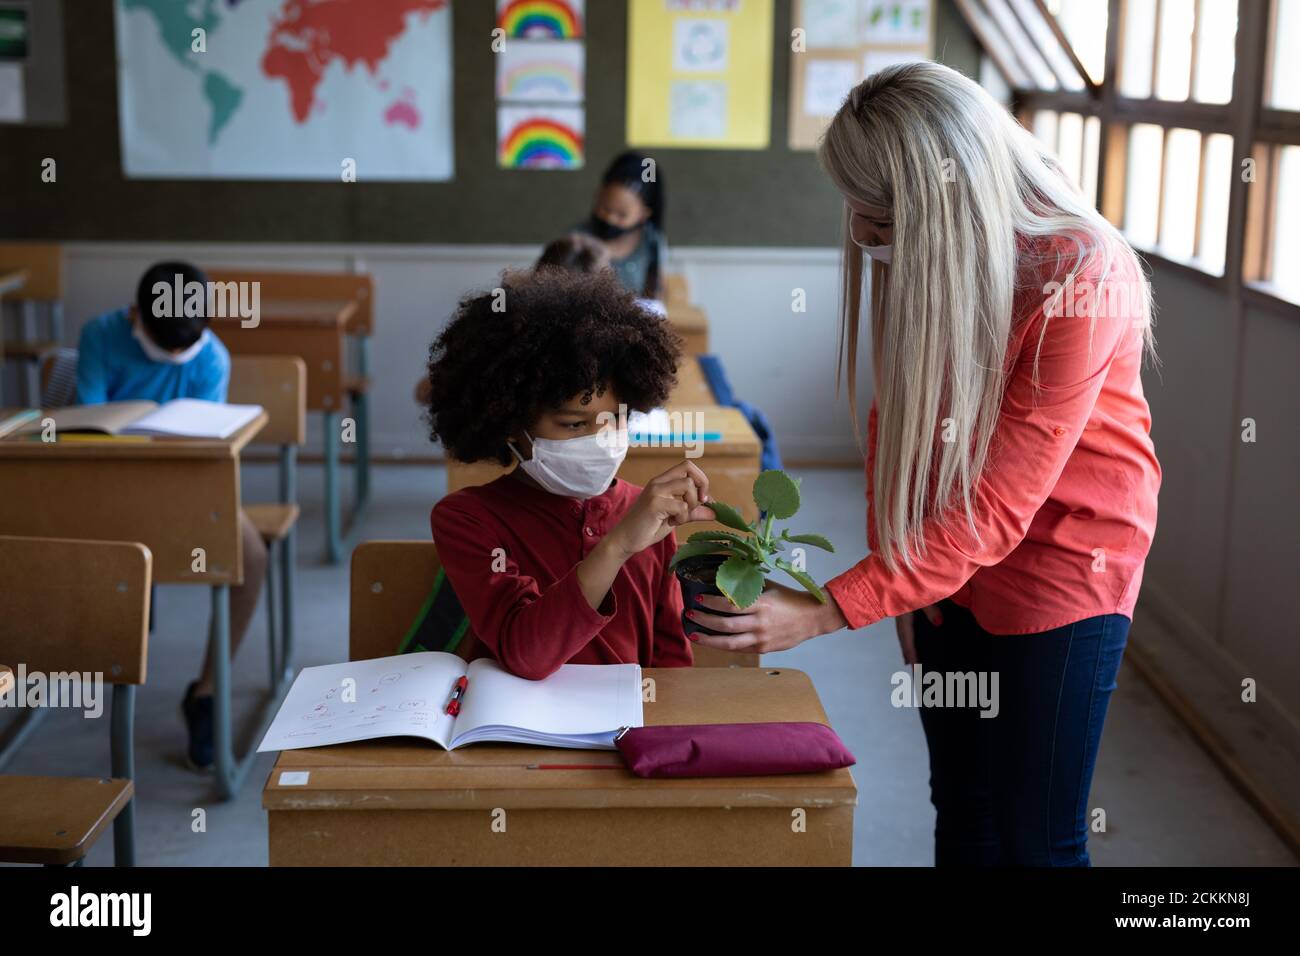 Female teacher wearing face mask showing a plant pot to a boy in school Stock Photo